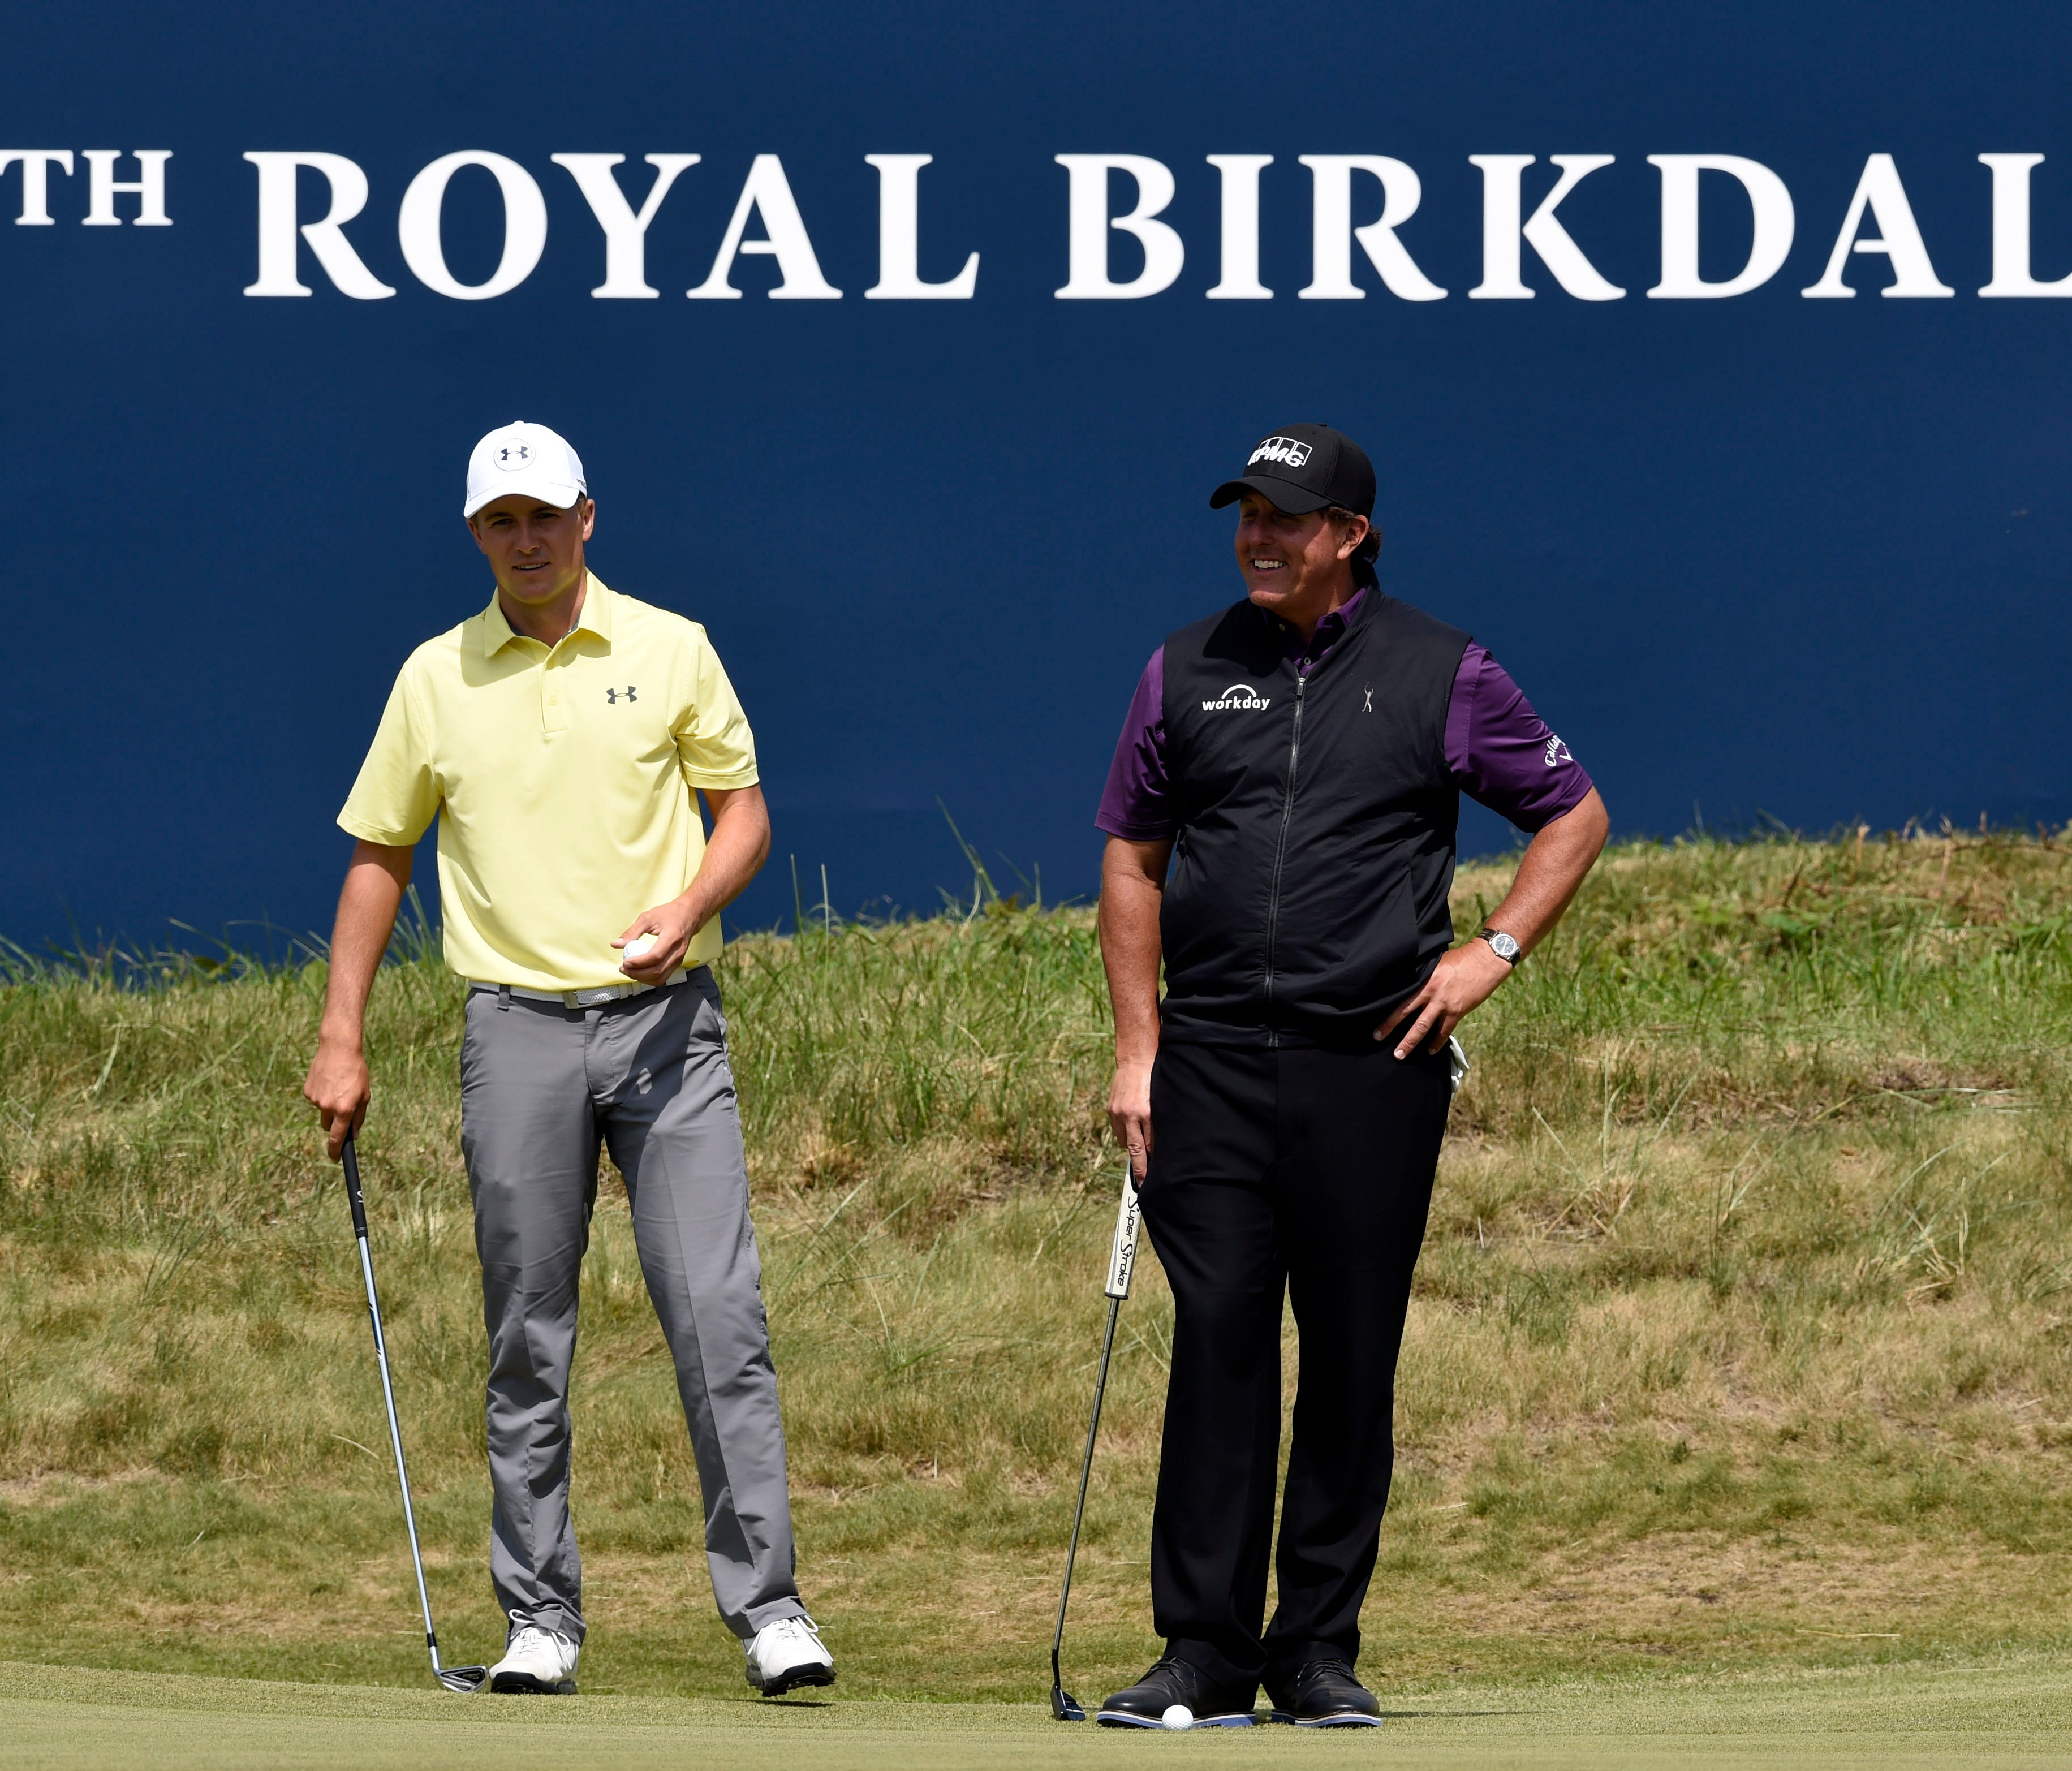 Jordan Spieth (left) and Phil Mickelson on the 18th green during a practice round of The 146th Open Championship golf tournament at Royal Birkdale Golf Club on July 18.